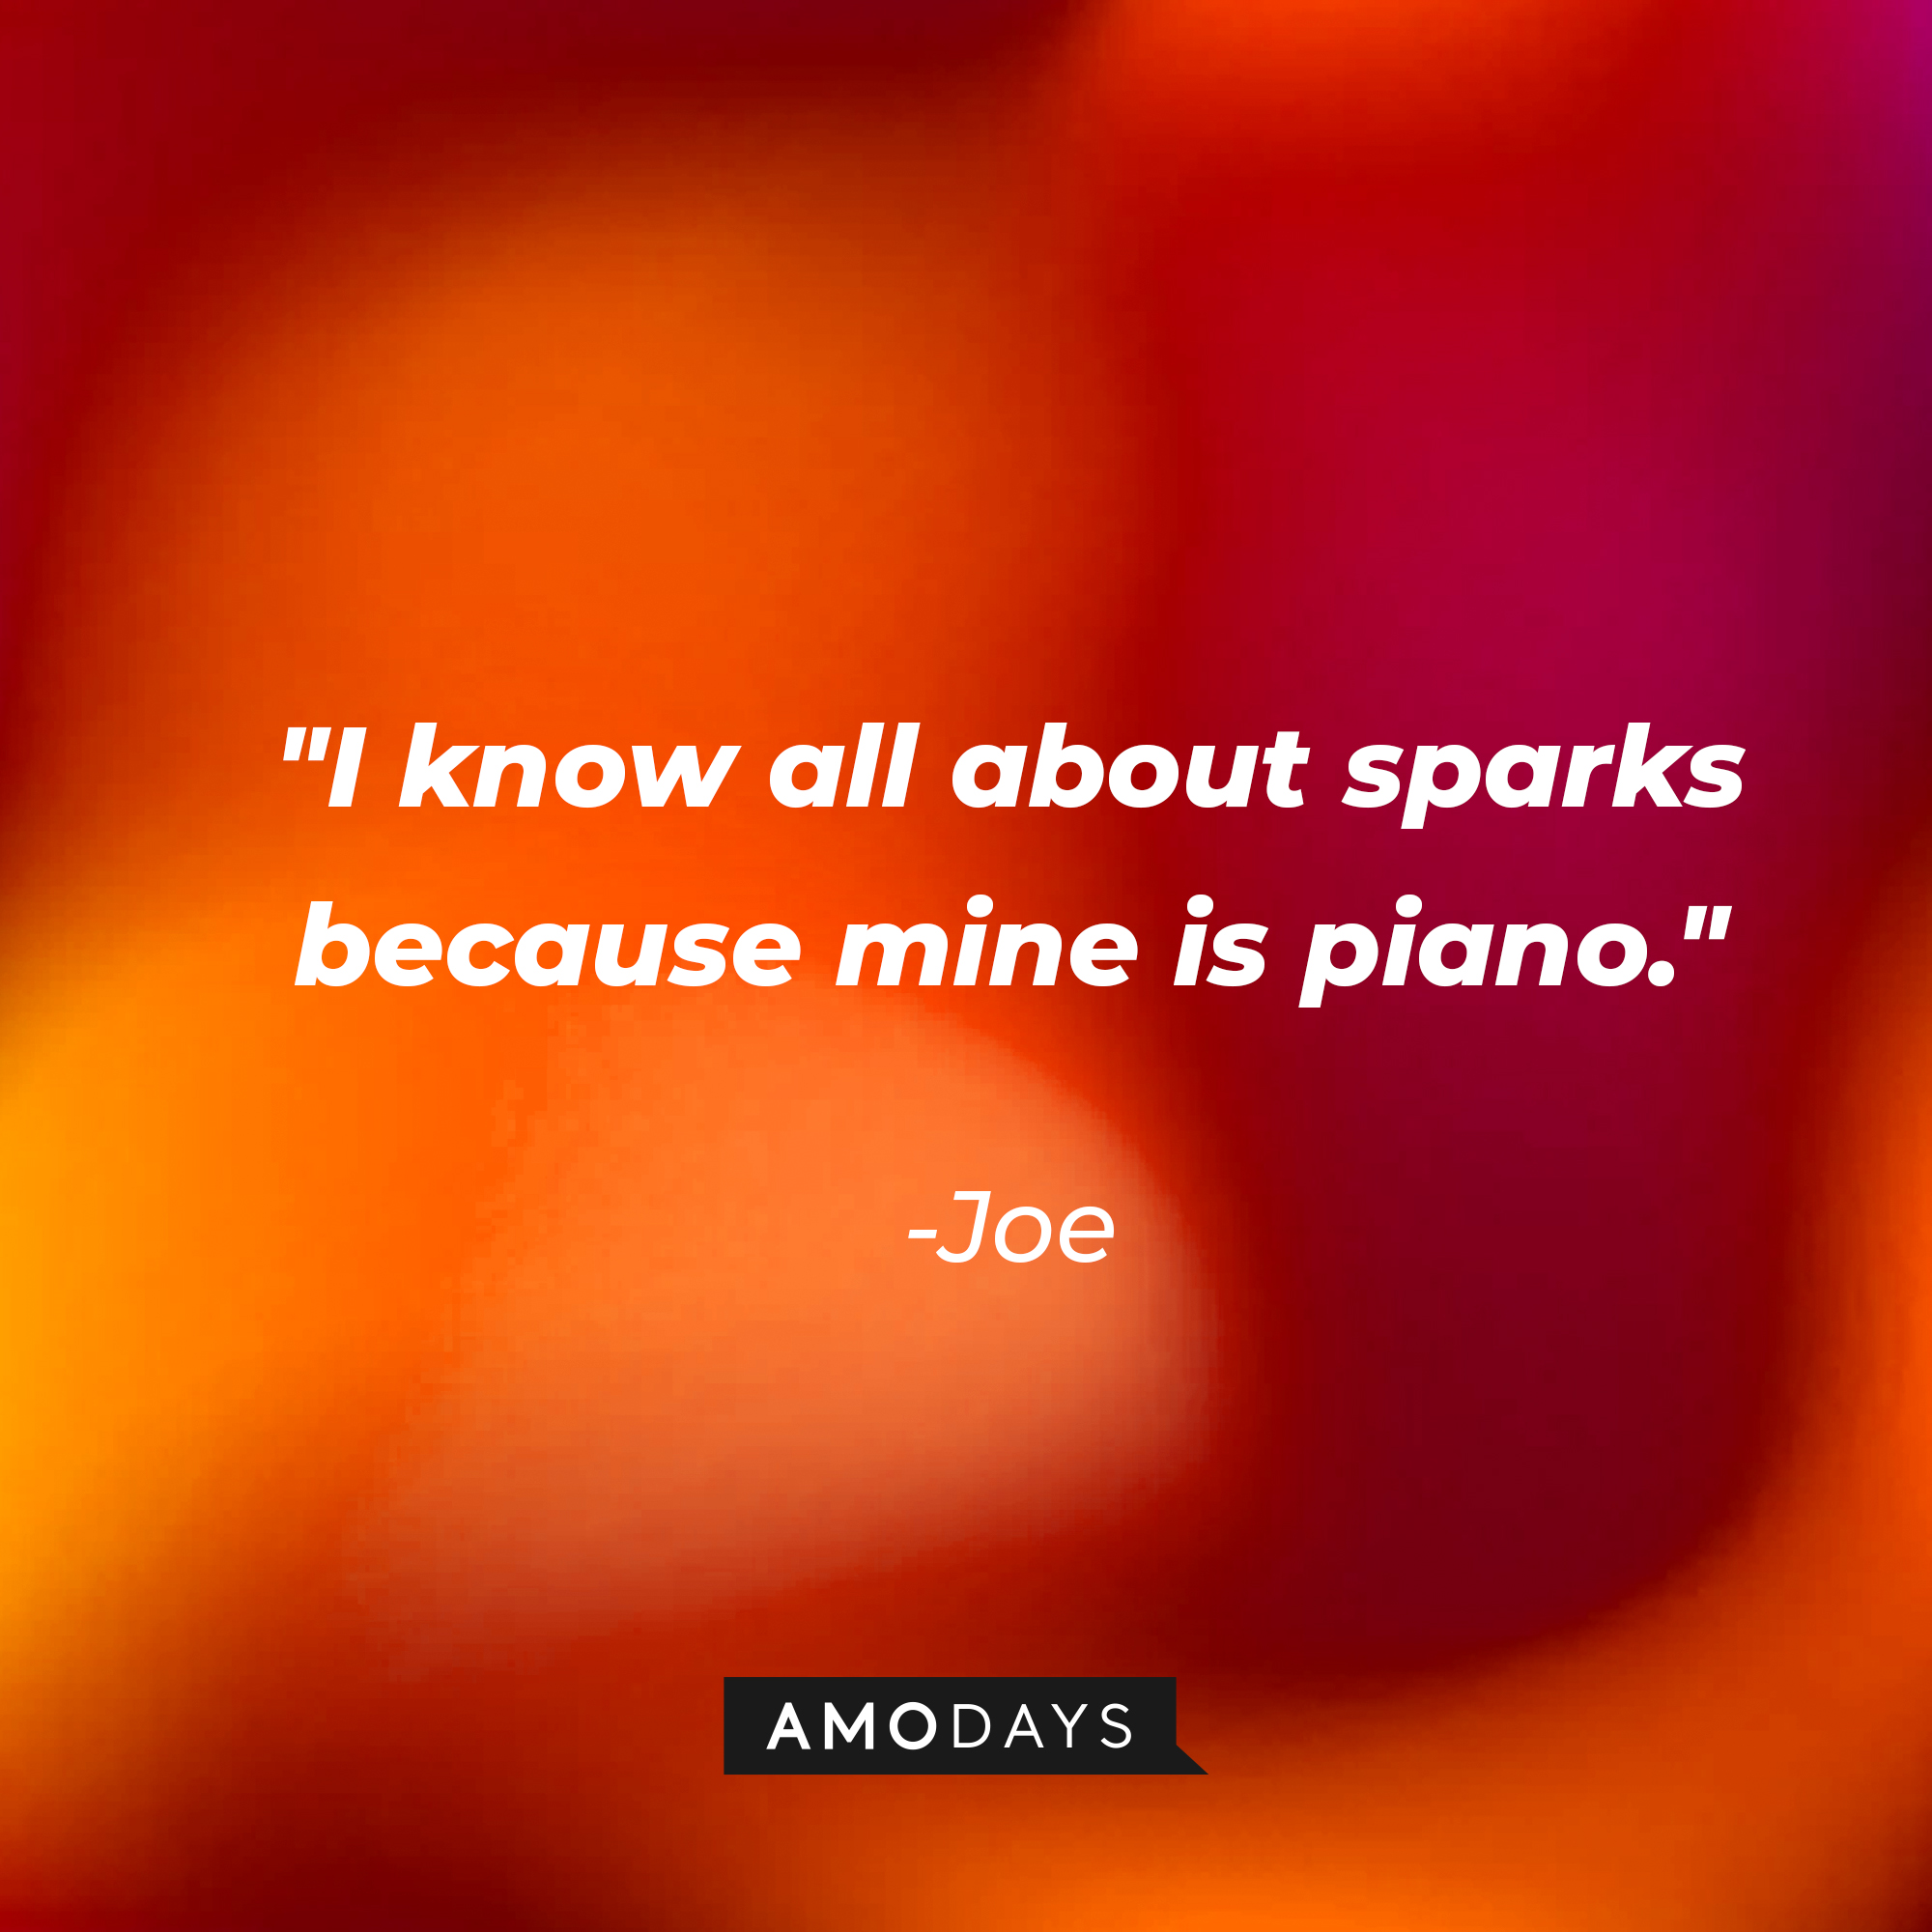 Joe's quote: "I know all about sparks because mine is piano." | Source: youtube.com/pixar